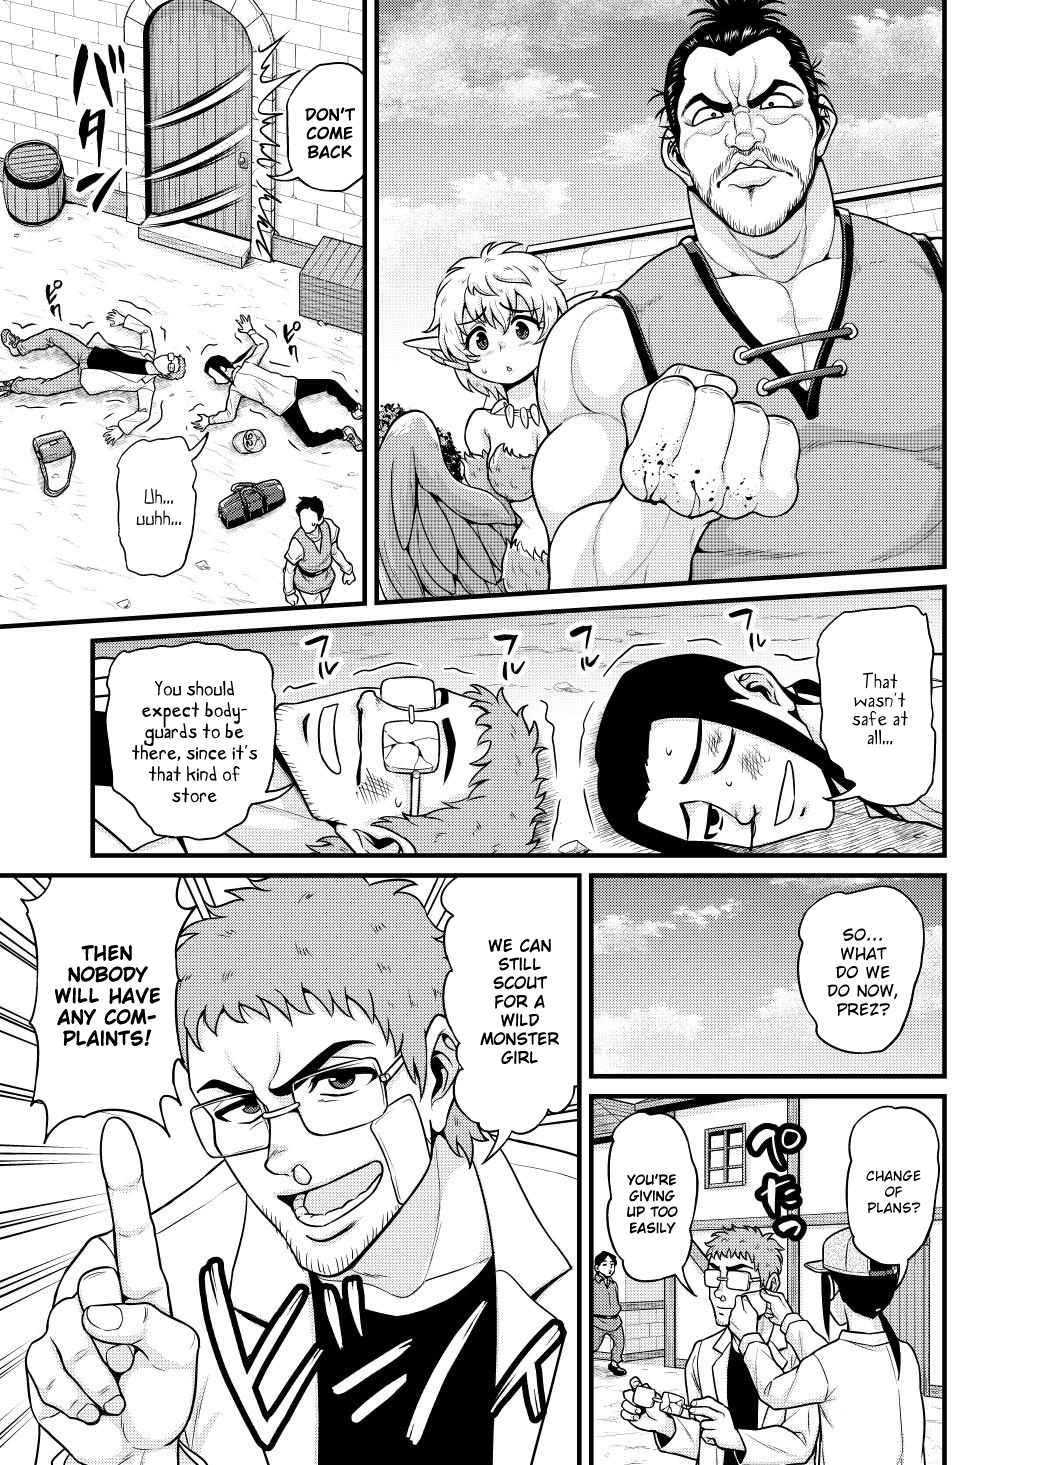 Filming Adult Videos in Another World - Chapter 6 Page 10